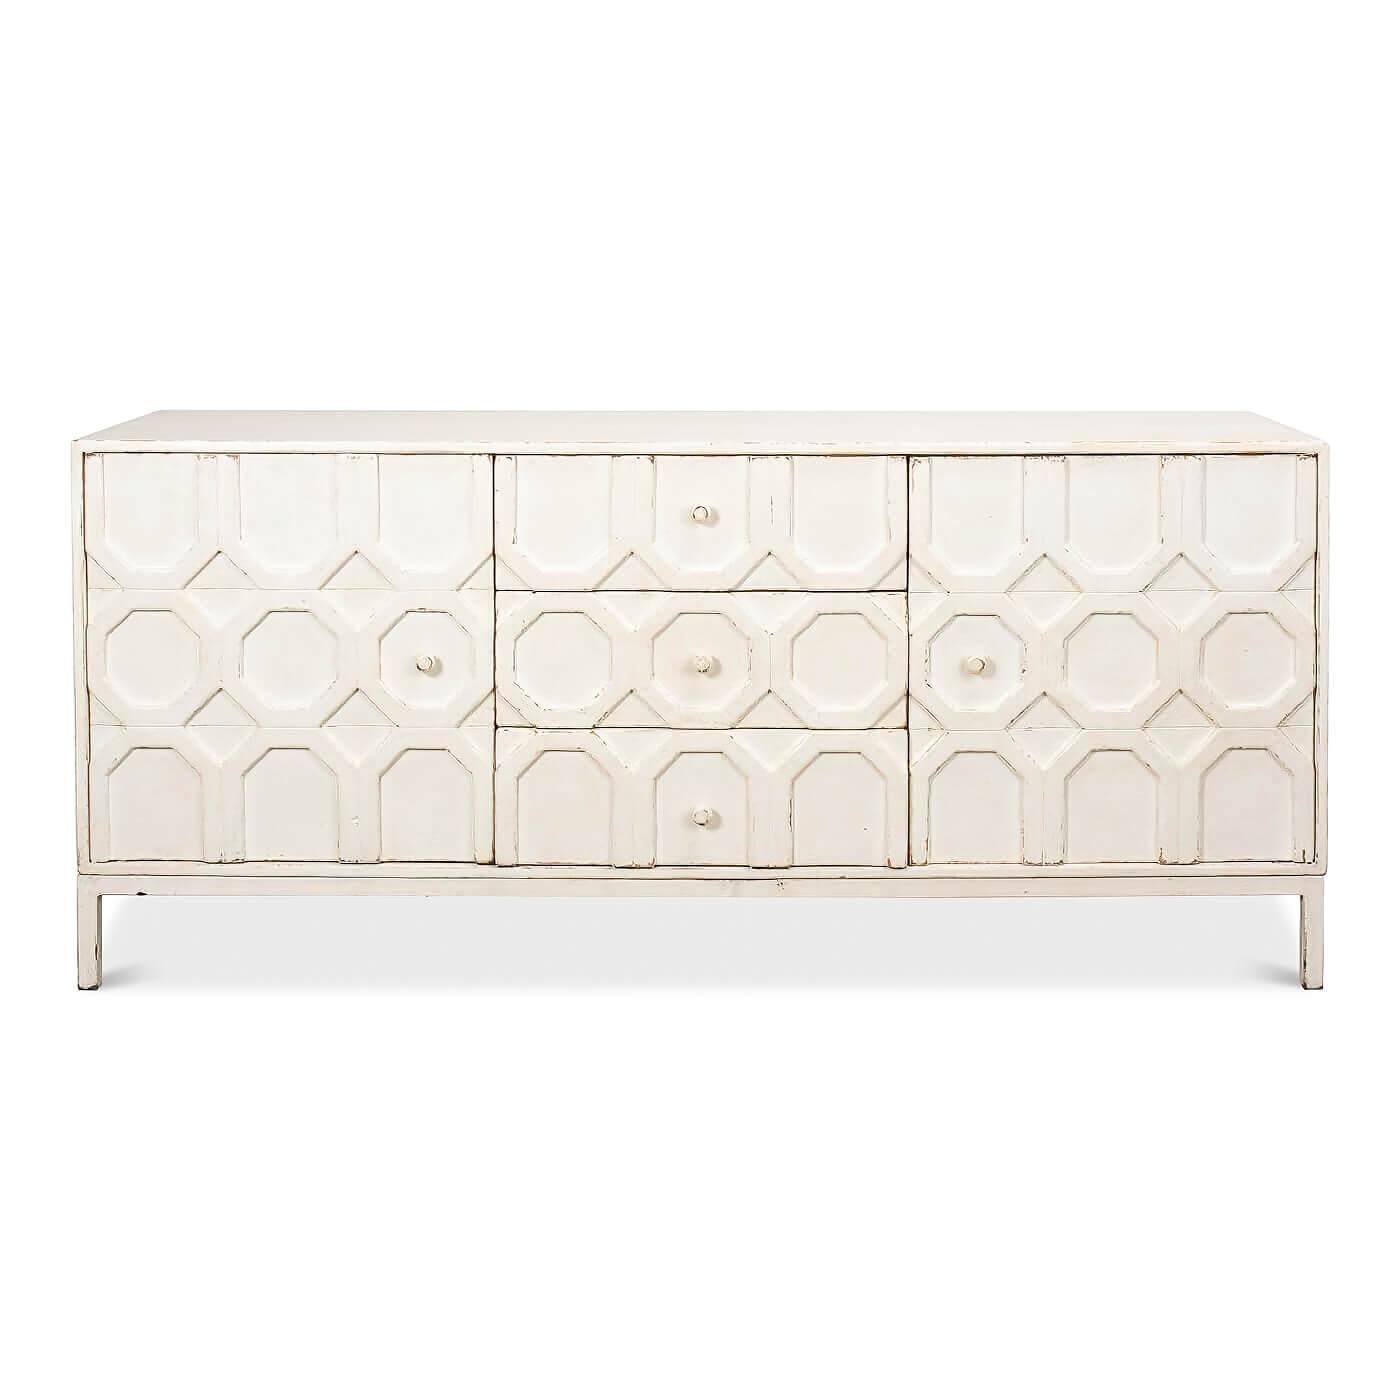 A modern geometric sideboard. This front has a unique applique design with patterns of octagons running down the center. It has two doors and a bank of three drawers in the center. 

This beautiful piece is crafted in pine and has a